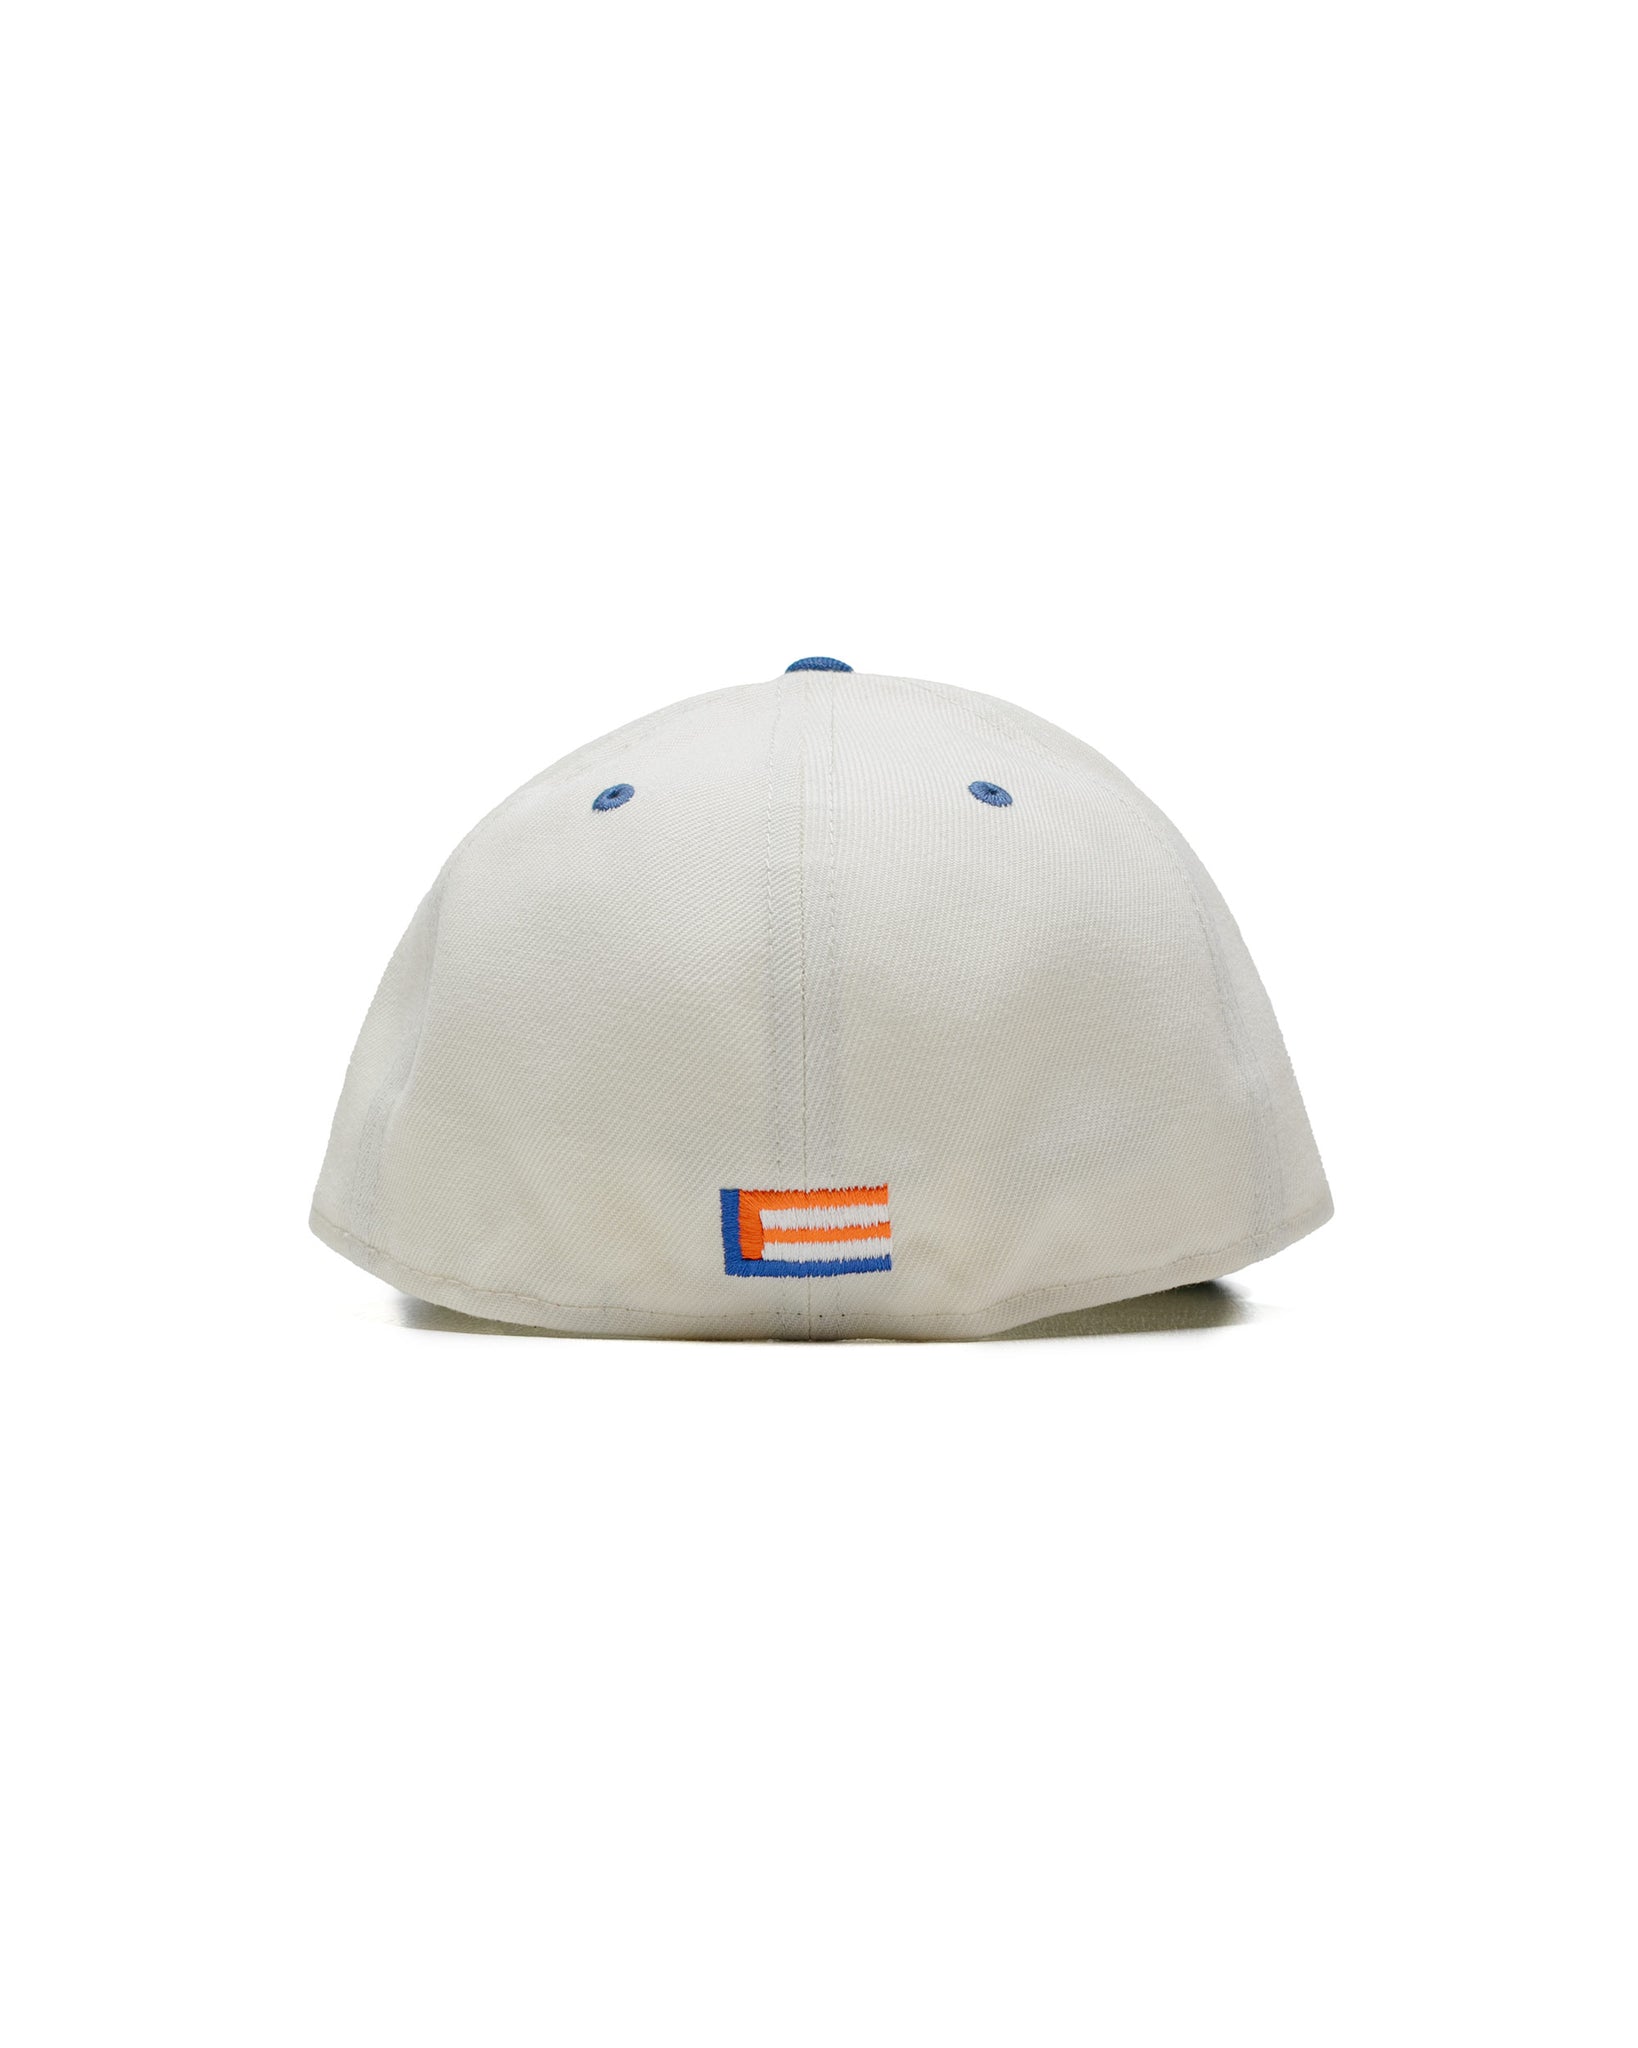 Lost & Found x New Era Low Profile 59FIFTY Cap WhiteRoyal back